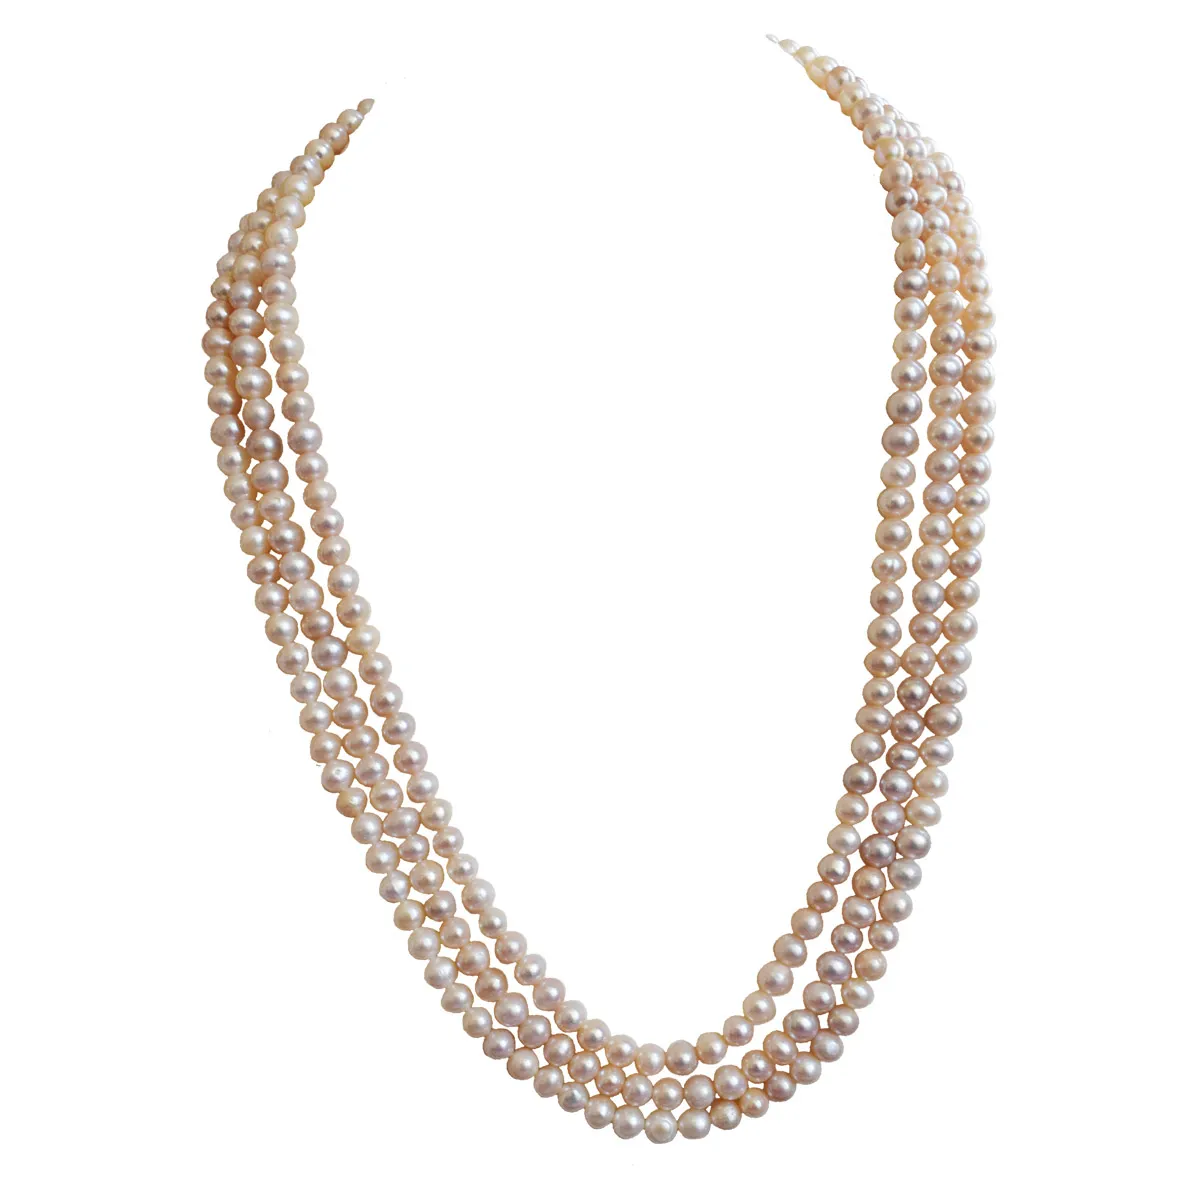 3 Line Real Freshwater Pinkish Pearl Necklace for Women (SN1057)